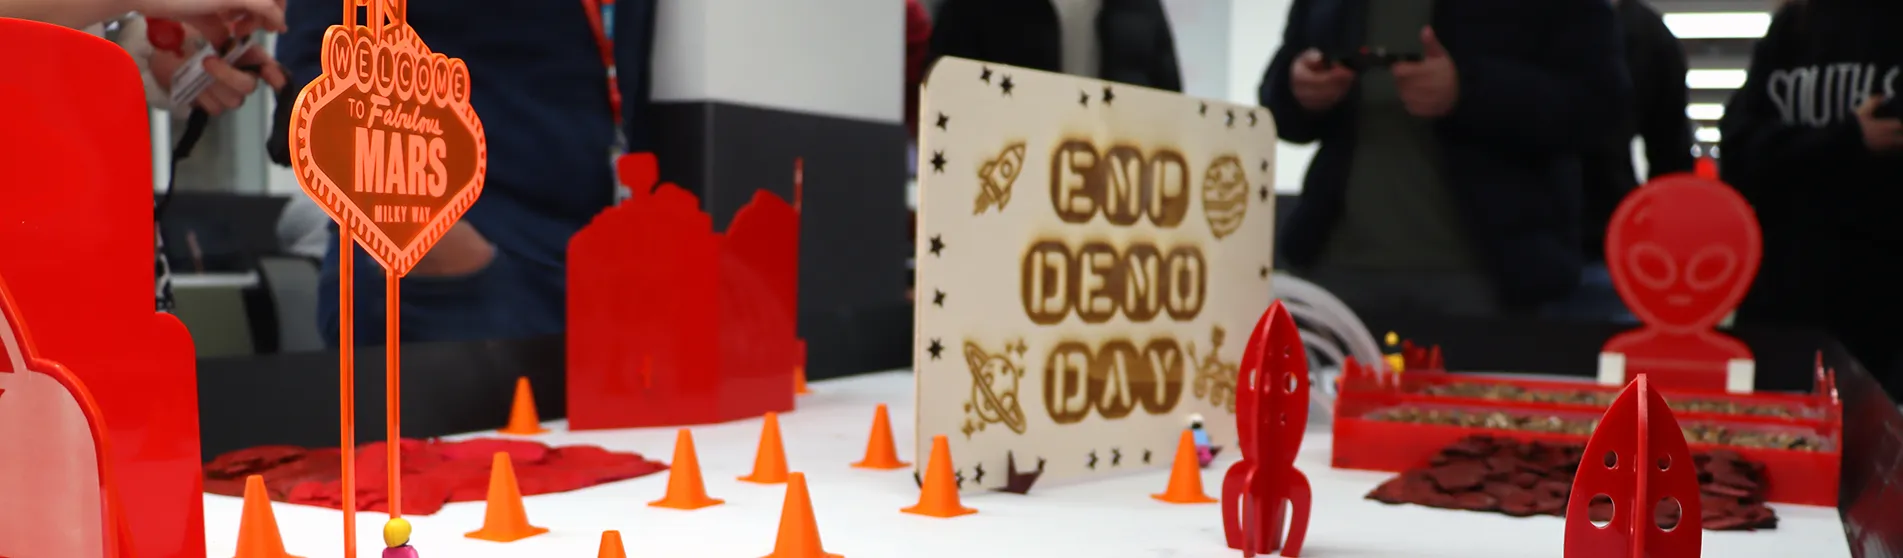 DemoDay feature banner